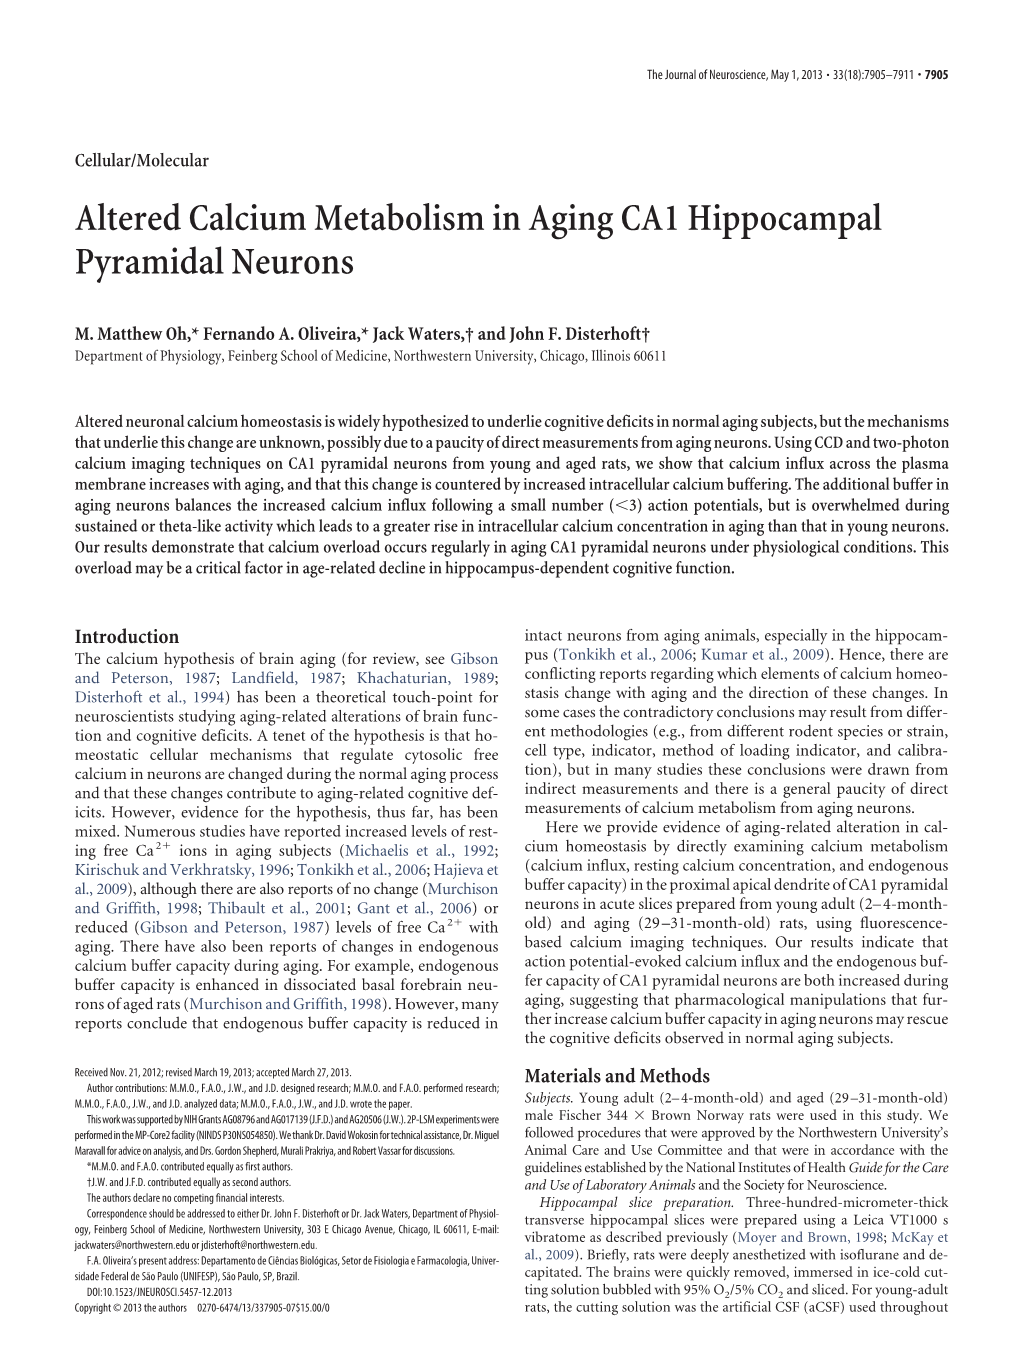 Altered Calcium Metabolism in Aging CA1 Hippocampal Pyramidal Neurons